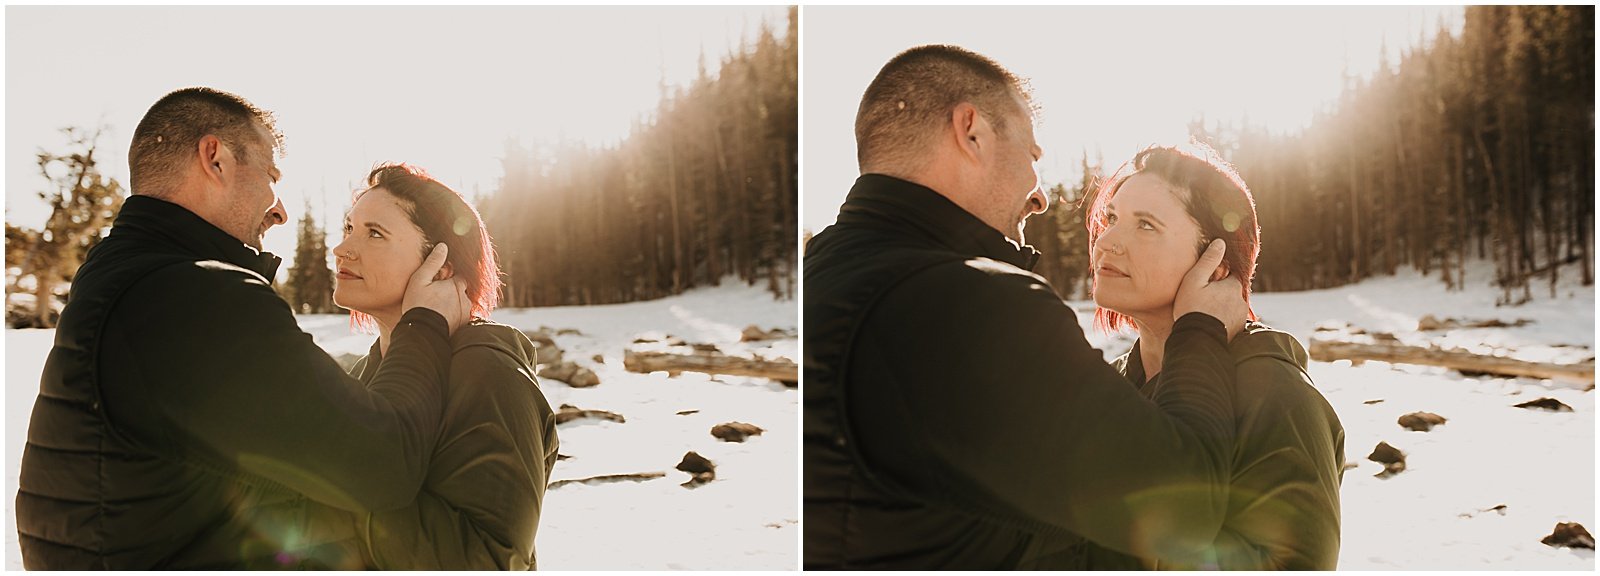 Mountain-Engagement-Photos-AndreaWagnerPhotography_0071.jpg